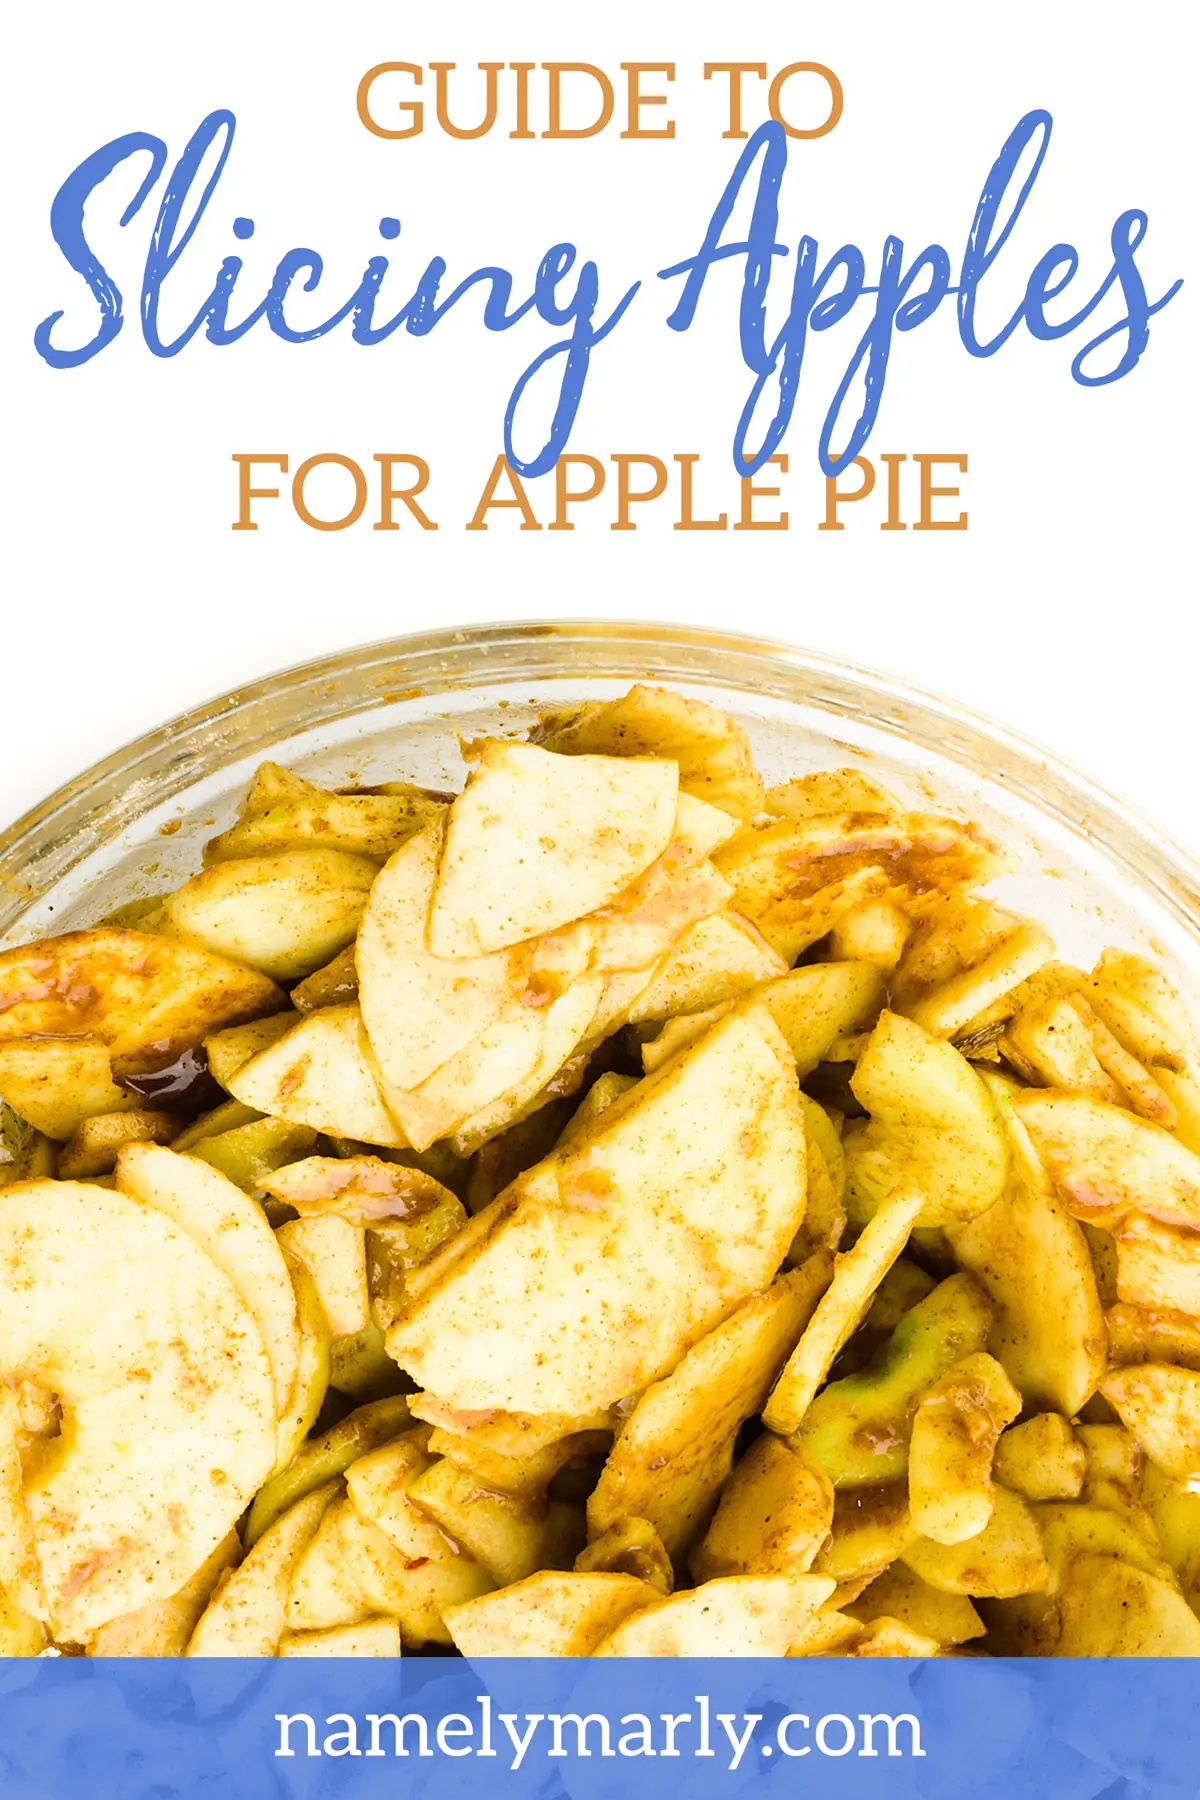 A photo shows sliced apples with cinnamon on top in a bowl. The text above it reads: Guide to Slicing Apples for Apple Pie.